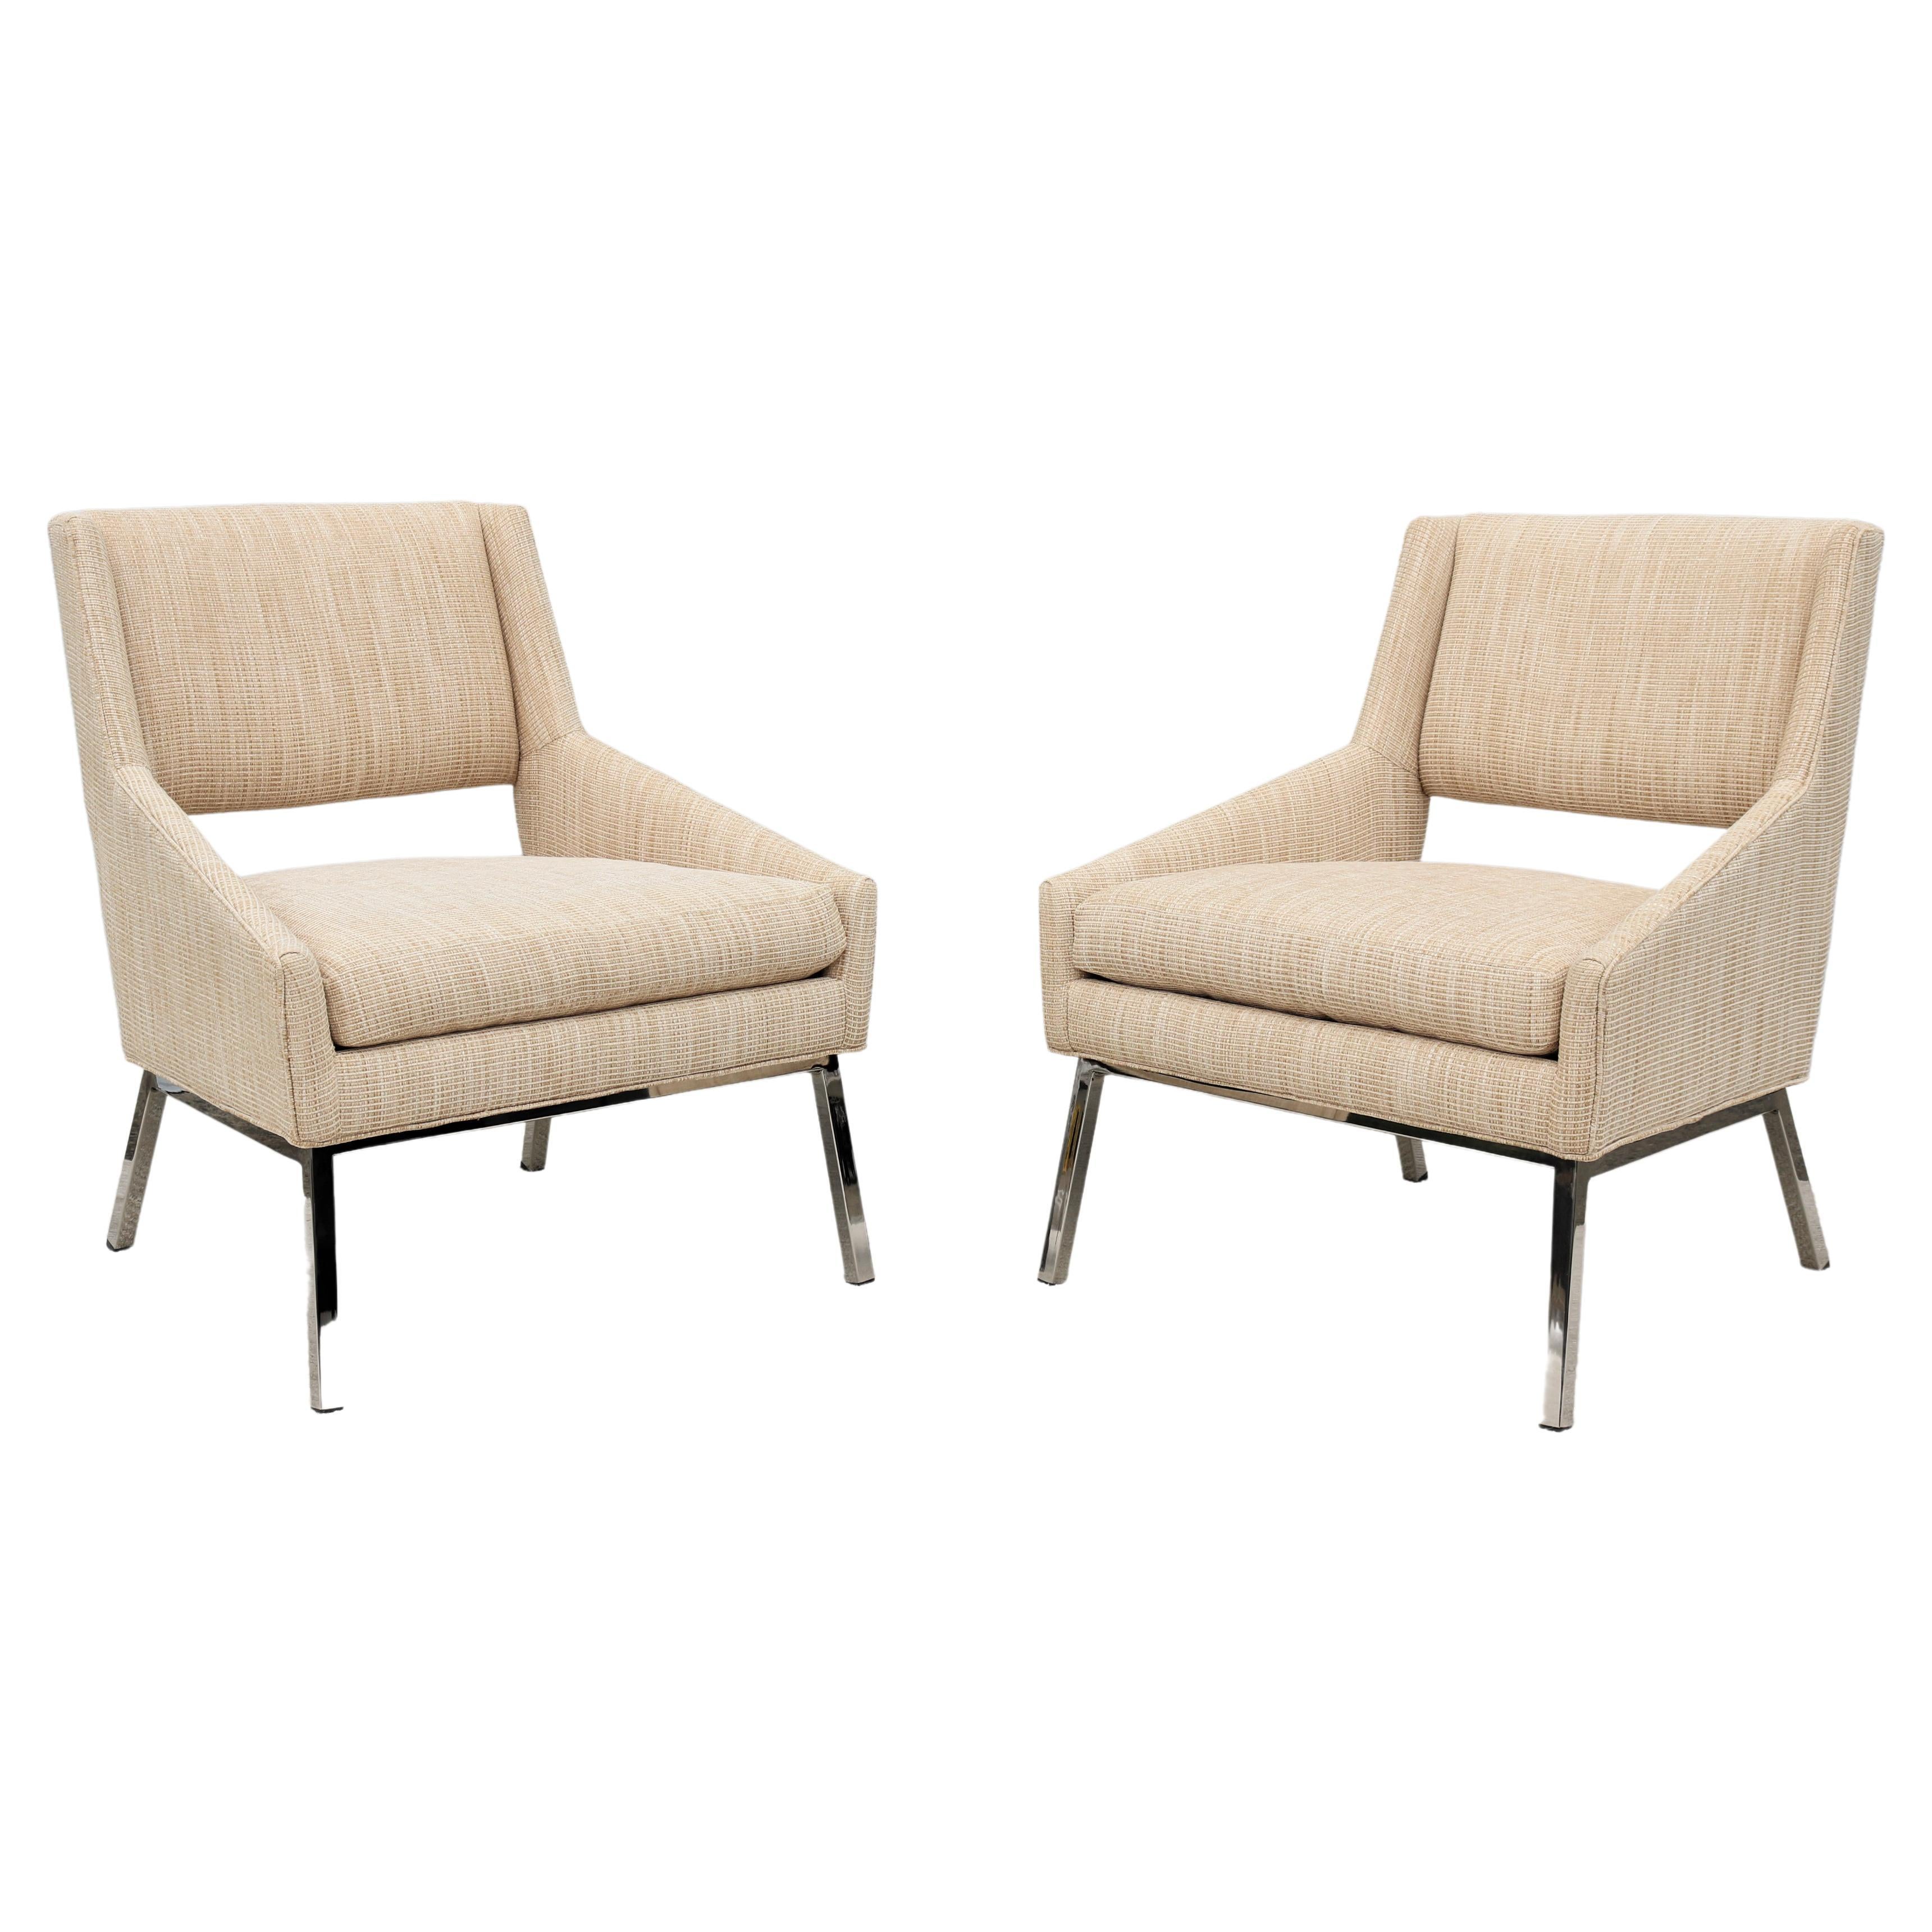 Mid-Century Modern Style Lexington Amani Beige Fabric Accent Chairs, a Pair